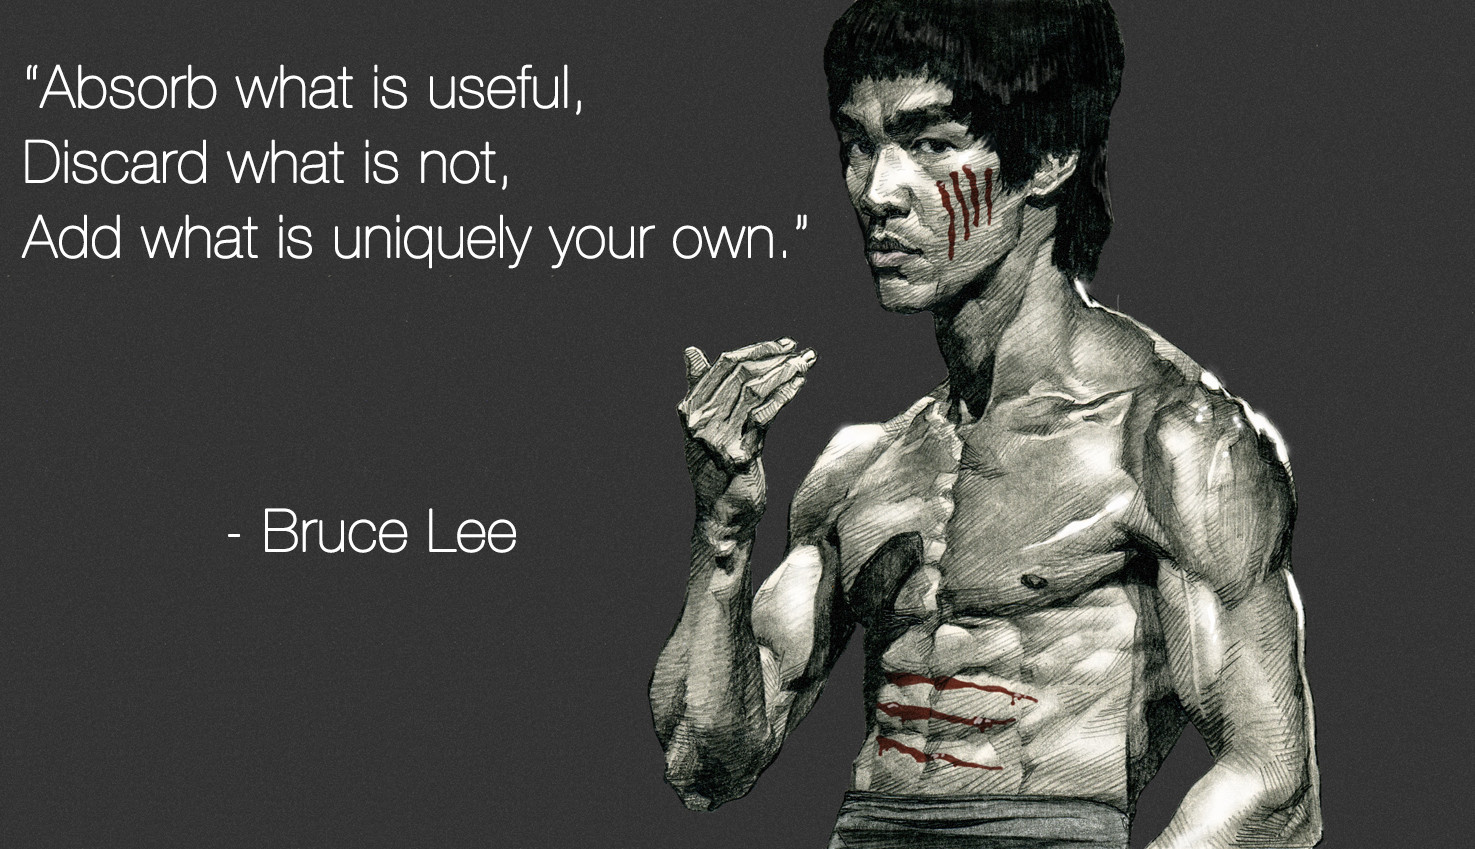 http://www.thelastdragontribute.com/wp-content/uploads/2013/07/Bruce-Lee-Quote-Absorb-what-is-useful.jpg